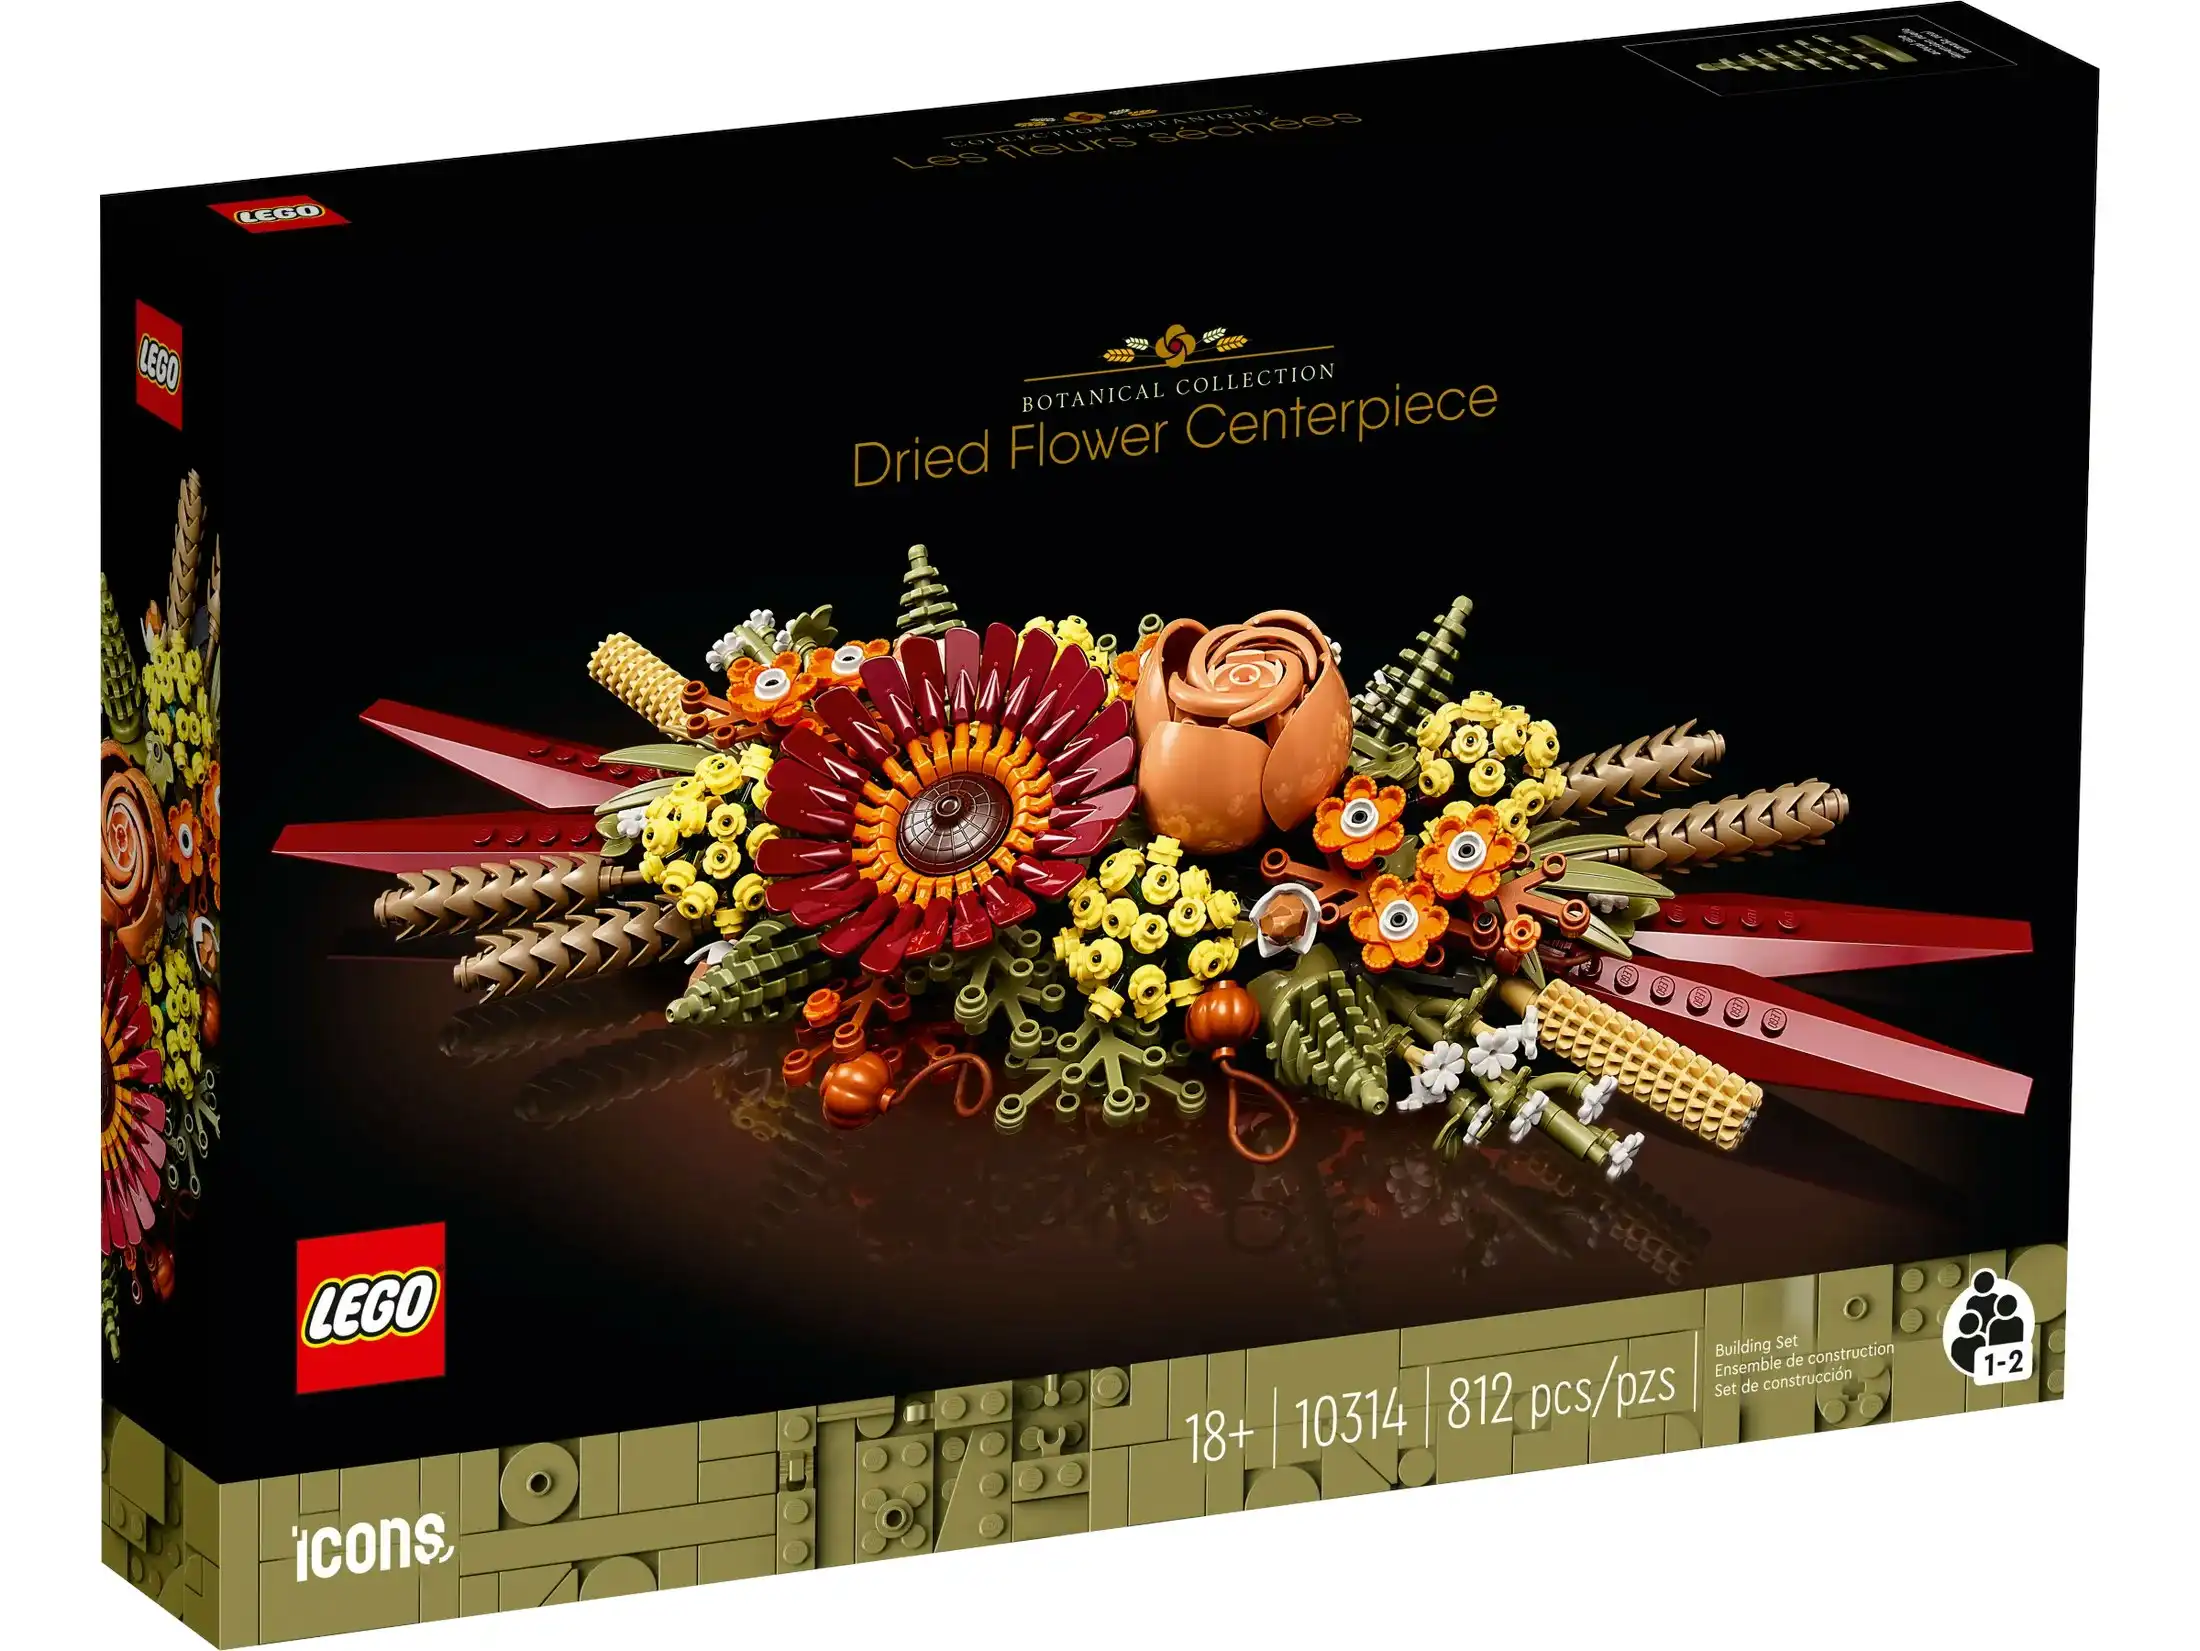 LEGO 10314 Dried Flower Centerpiece - Icons Botanical Collection